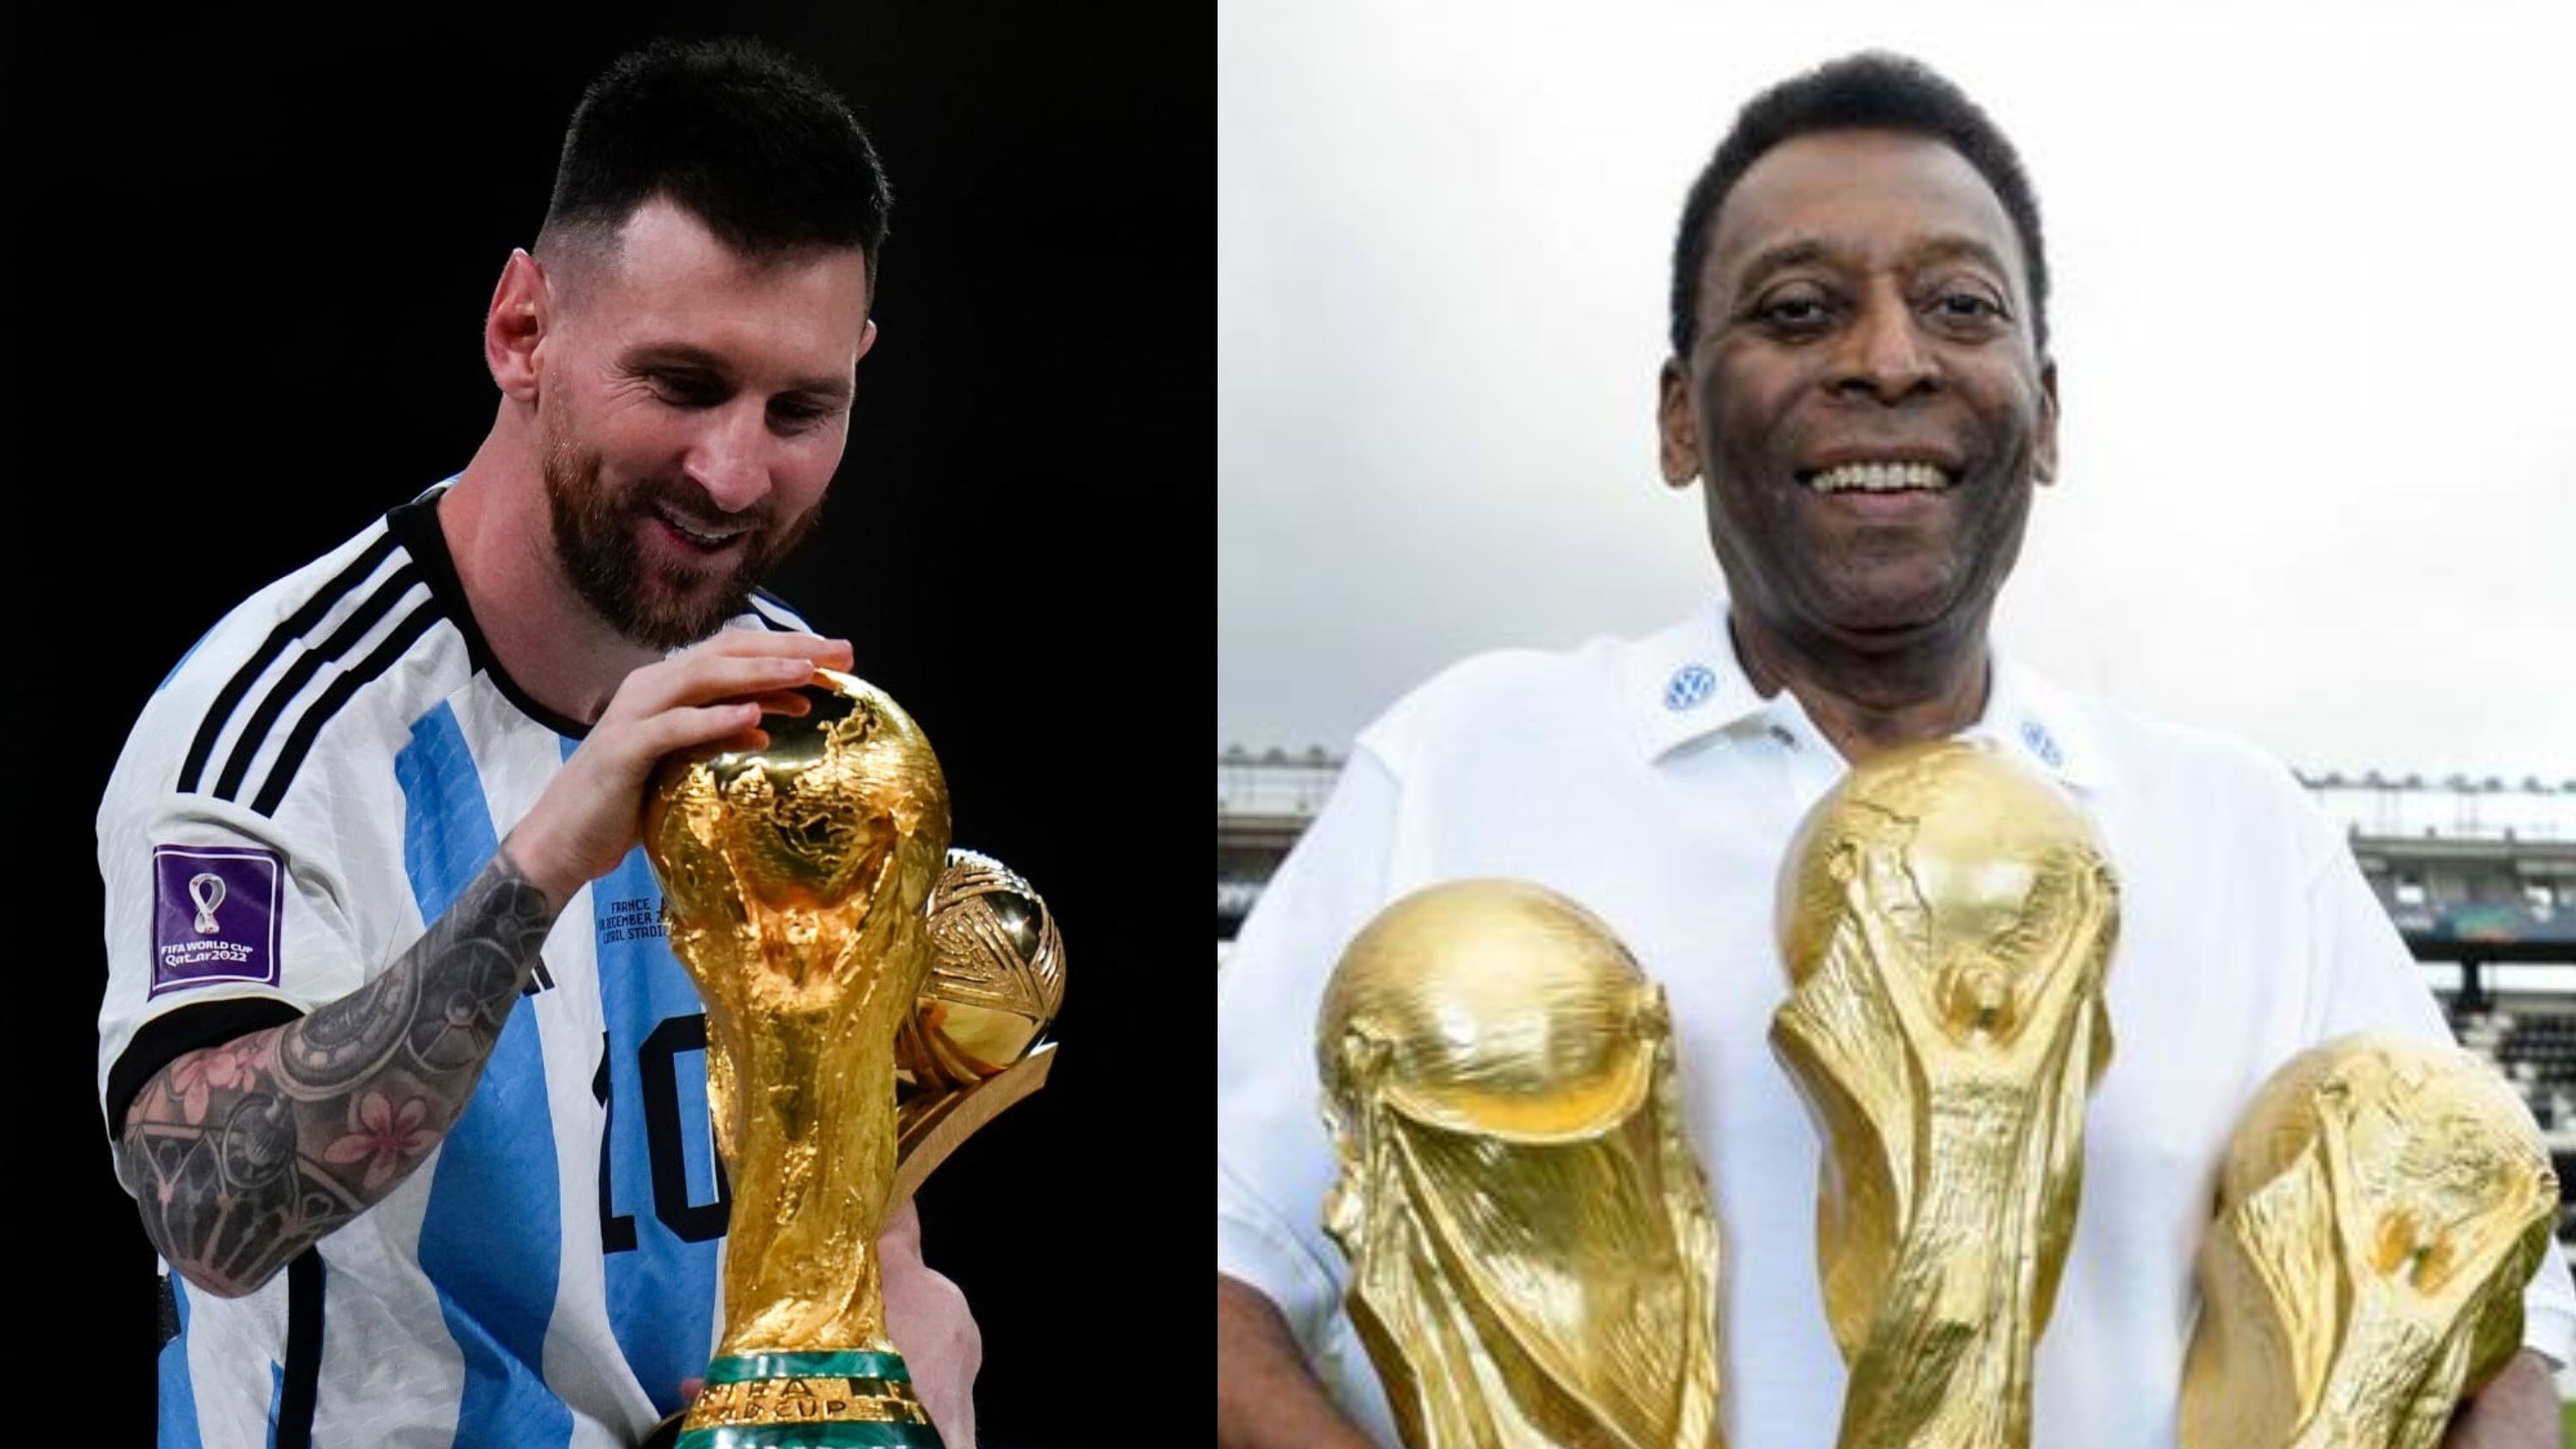 Pele's image that Lionel Messi was inspired by and repeated in Qatar